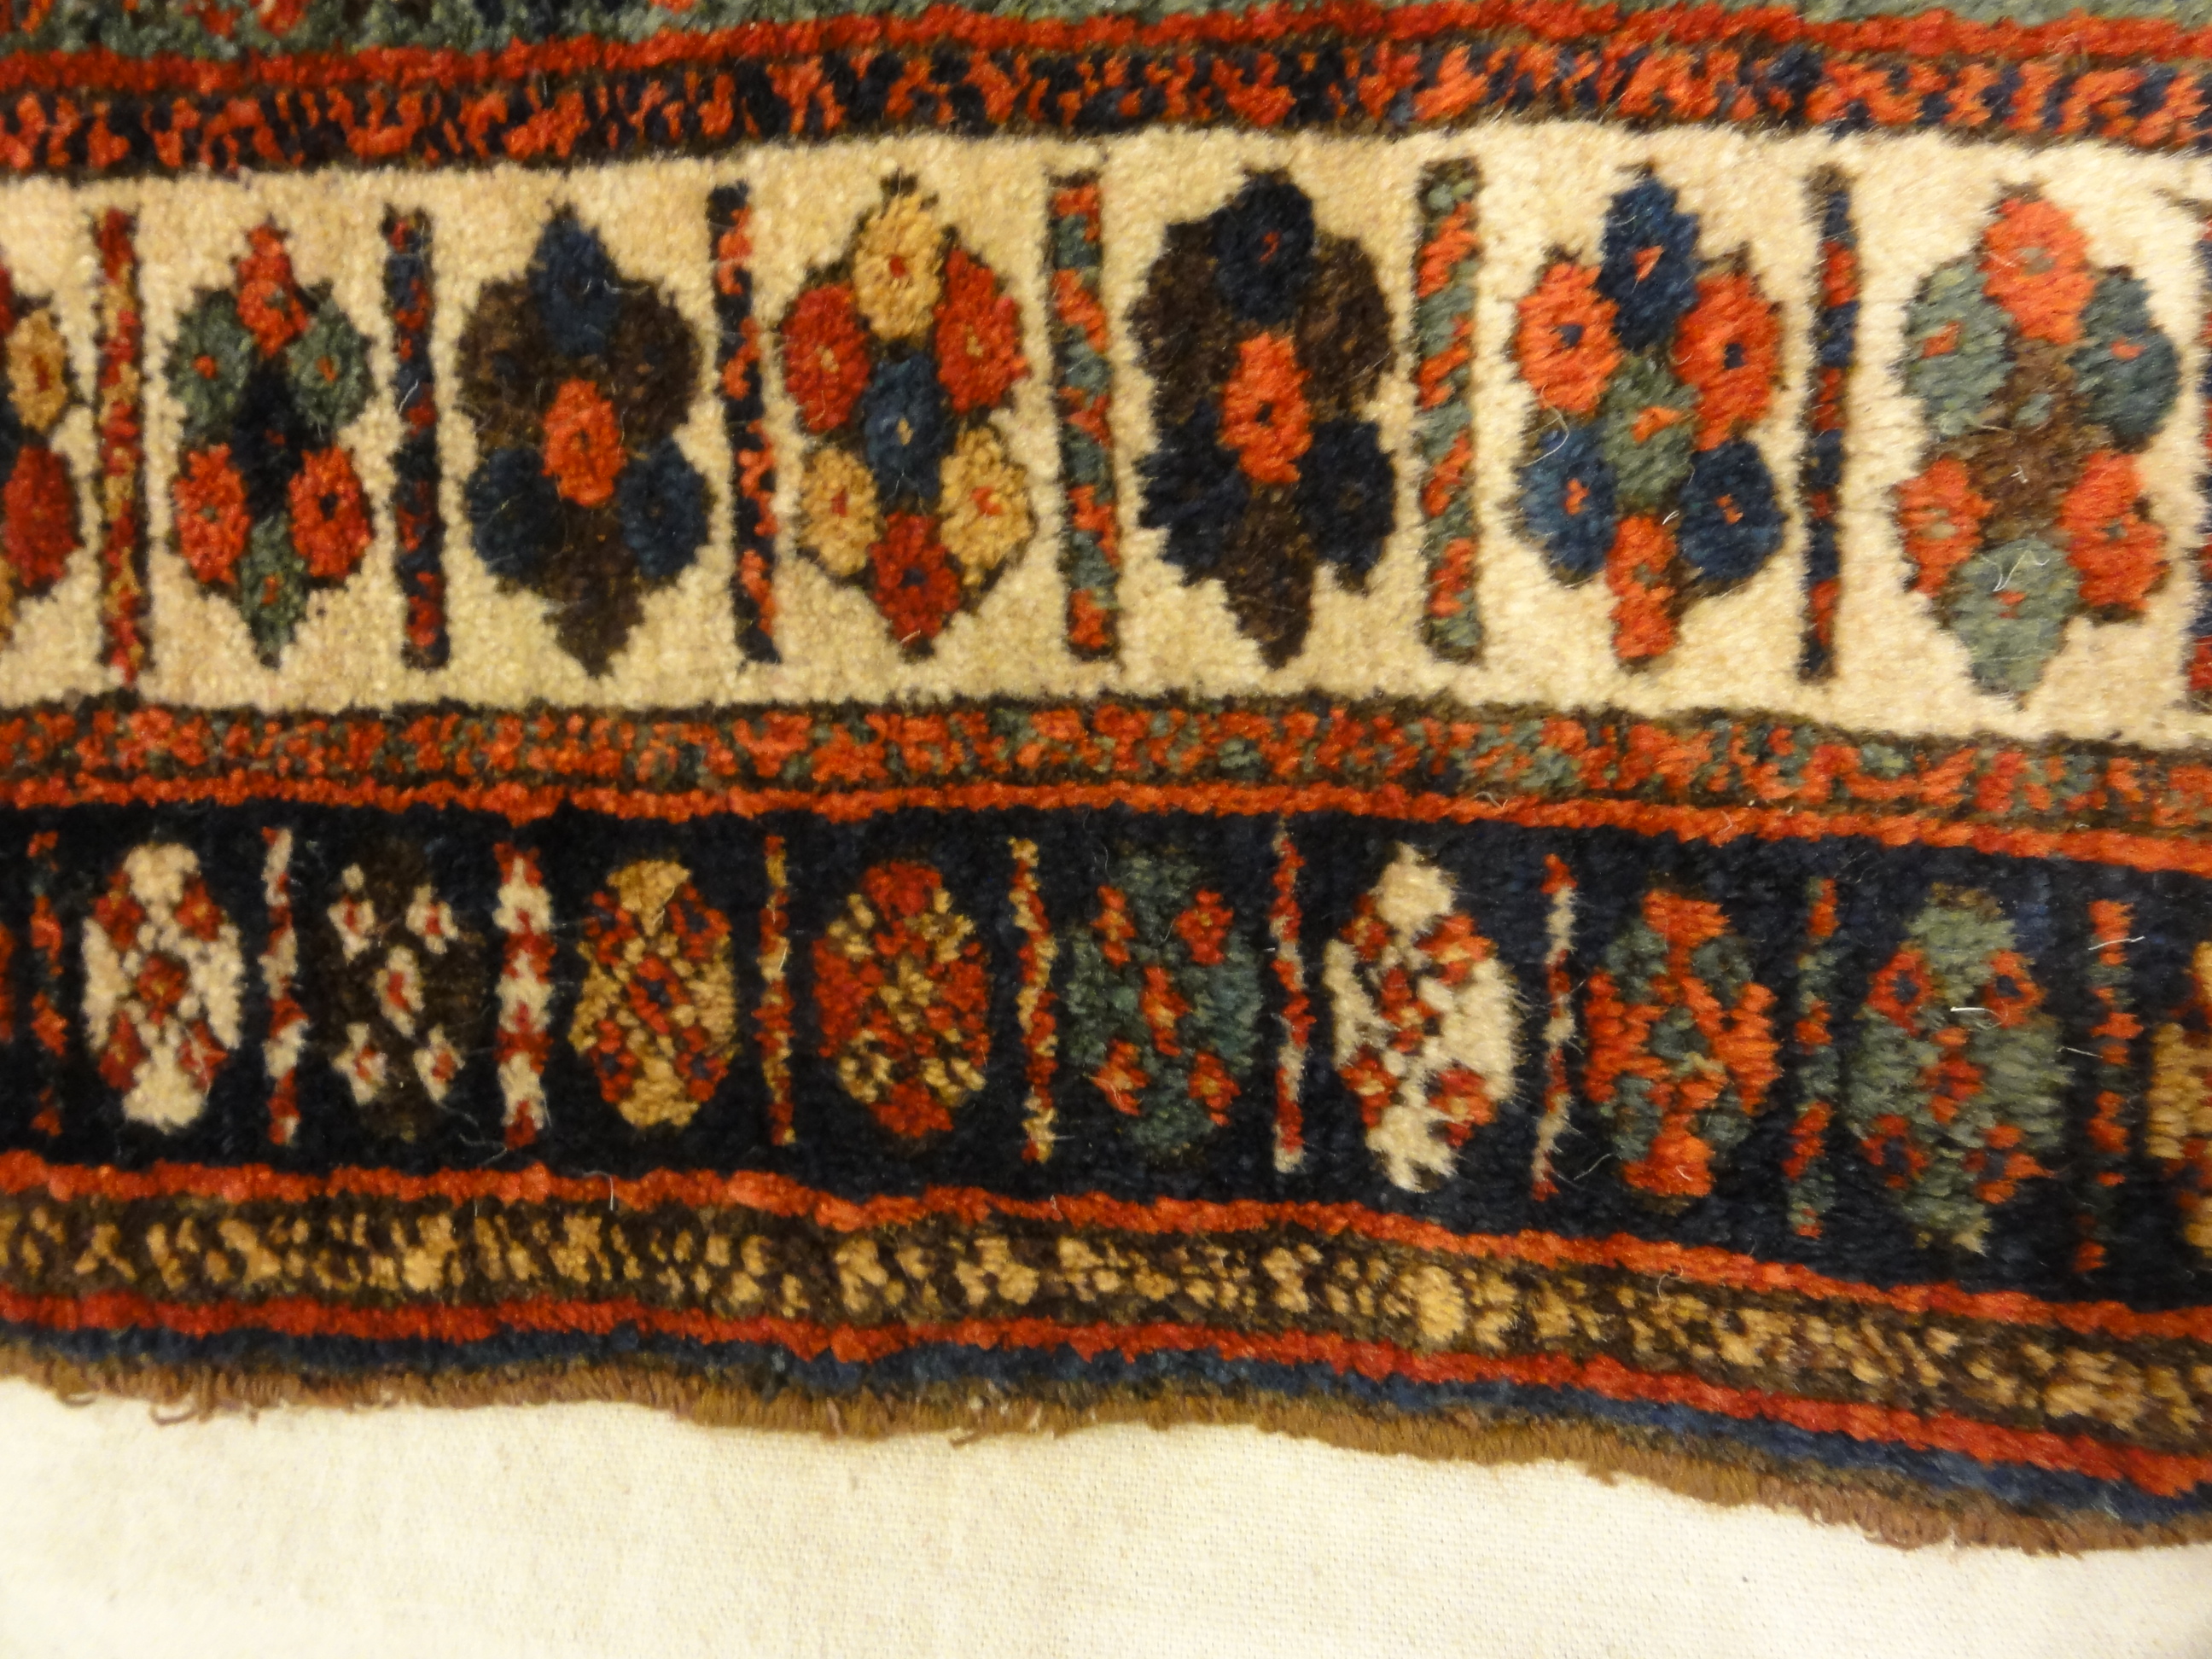 Antique Jaf Kurd Rug Circa 1870. A piece of genuine antique woven carpet art sold by the Santa Barbara Design Center, Rugs and More.